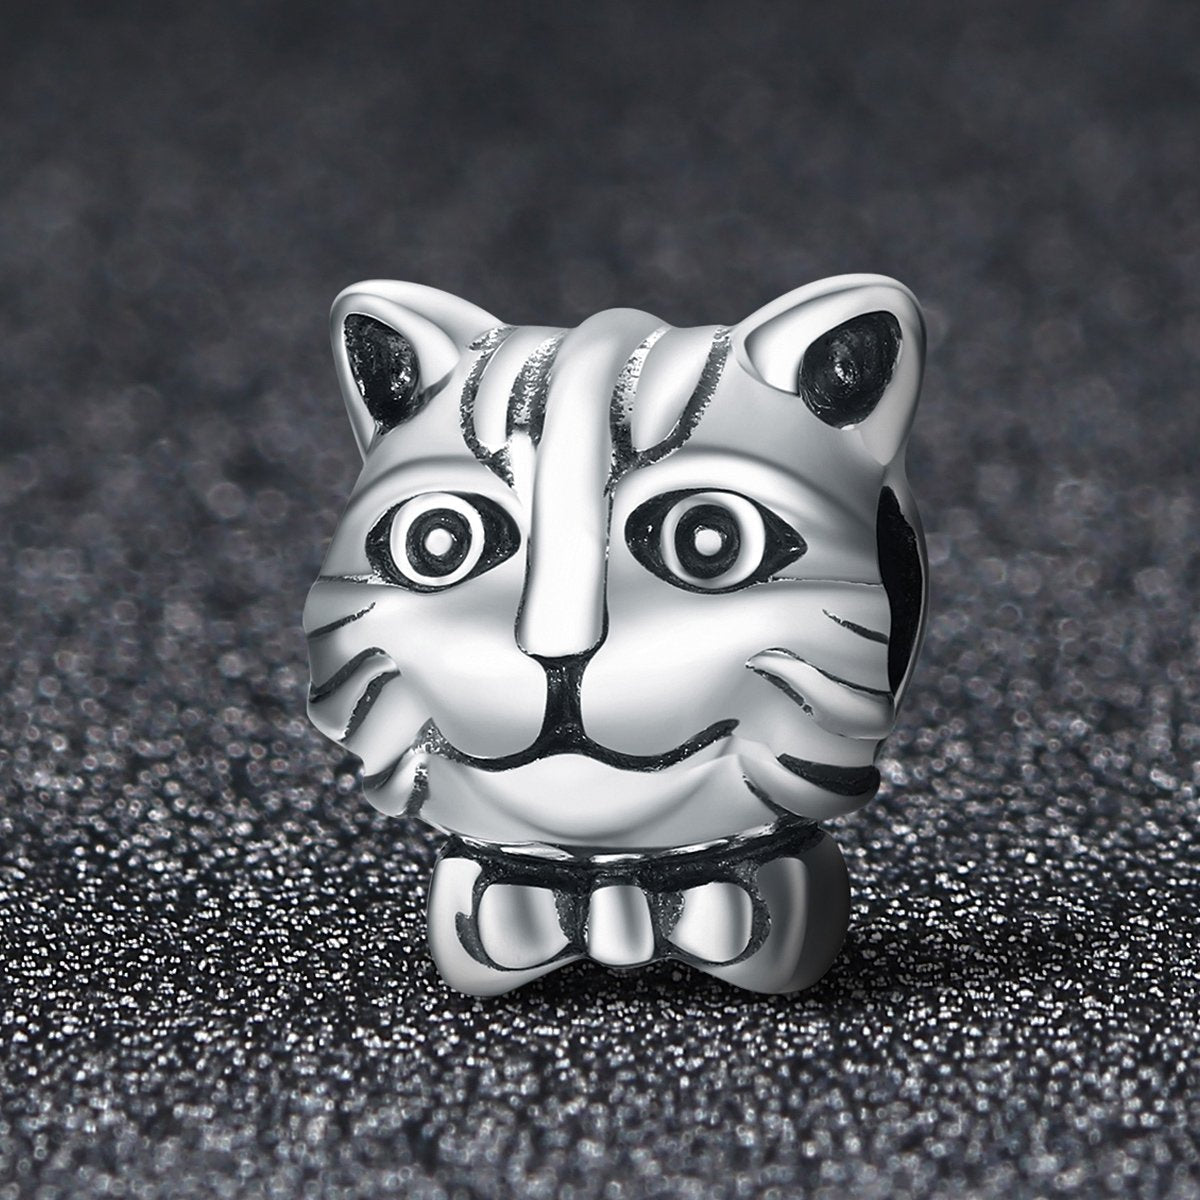 Sterling 925 silver charm the cat/pussy bead pendant fits Pandora charm and European charm bracelet Xaxe.com